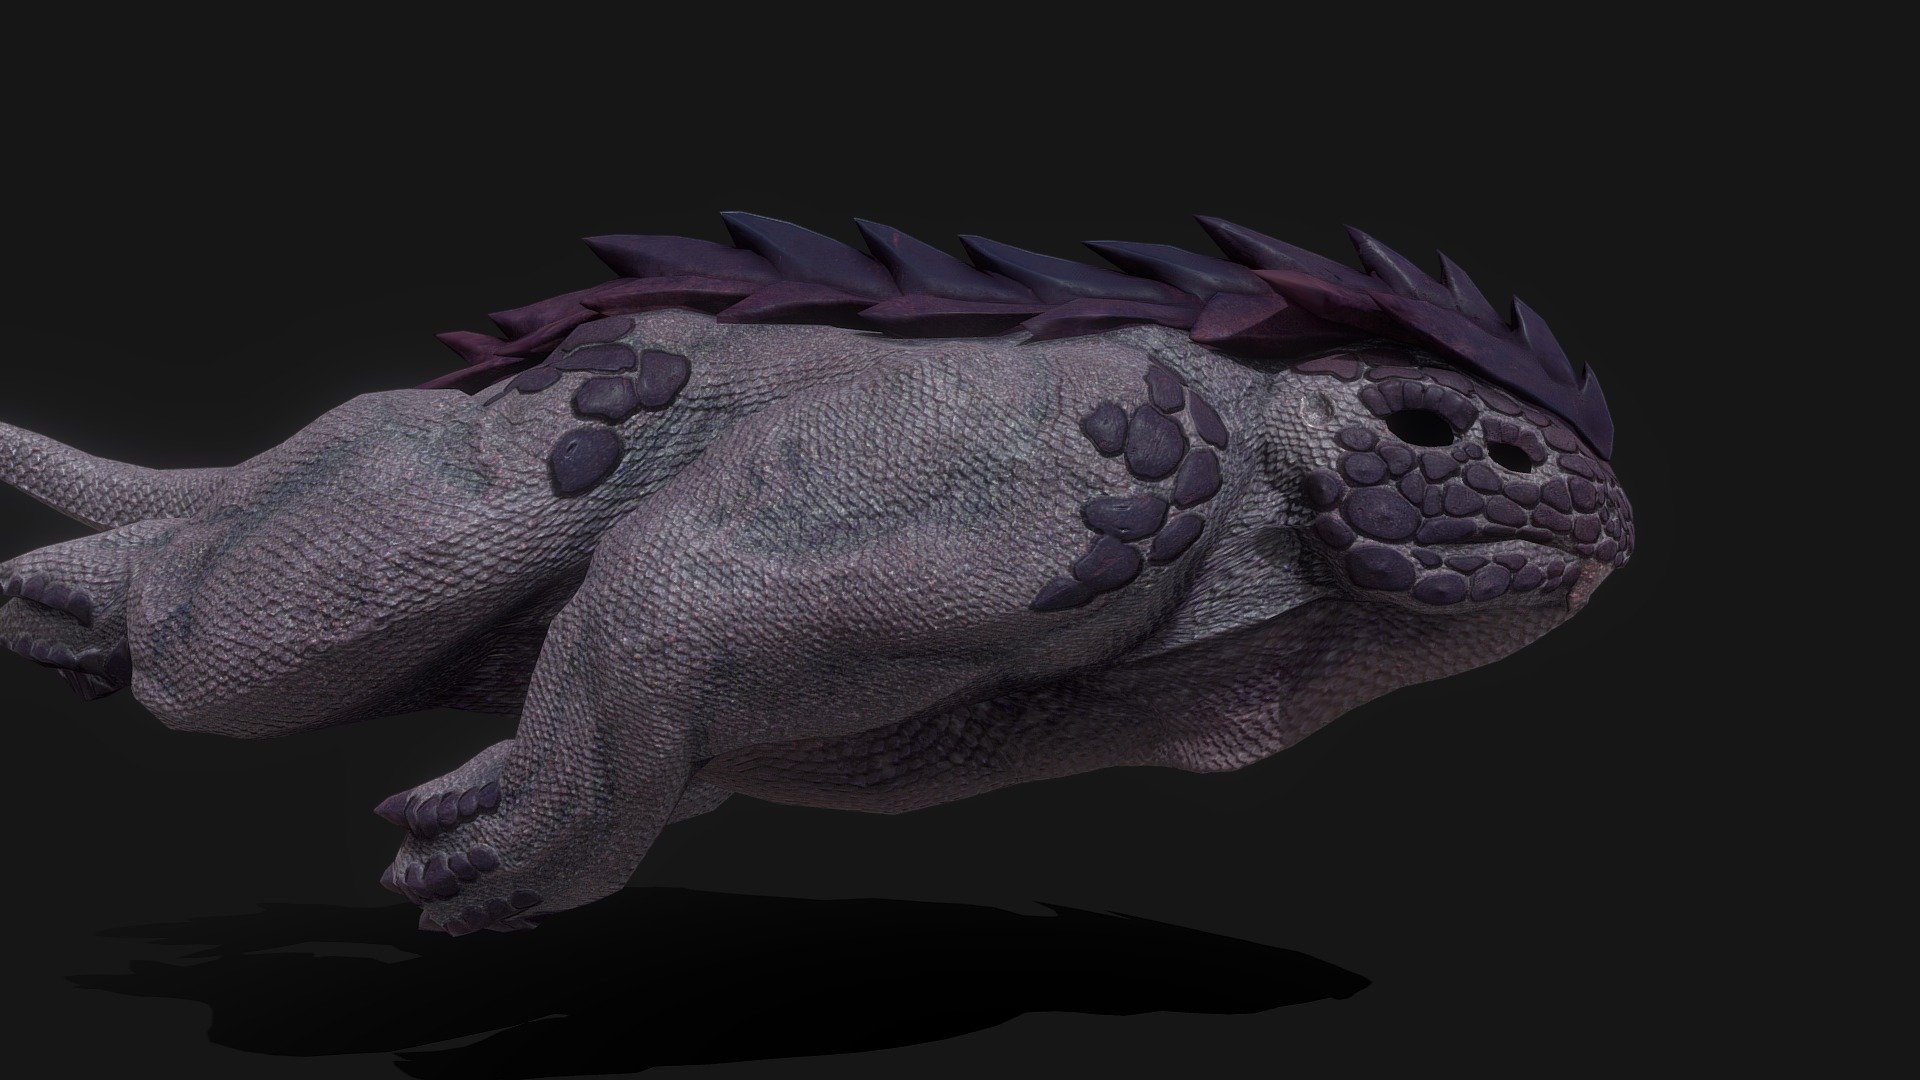 An animated Alien Mud Beast!

Designed for games in Low-poly PBR including Albedo, Normal, AO, and Roughness 4K textures.

This model from Ferocious Industries can be found in 3 different material skins, and this one uses the ‘Violet’ texture set.

7345 Triangles 3d model